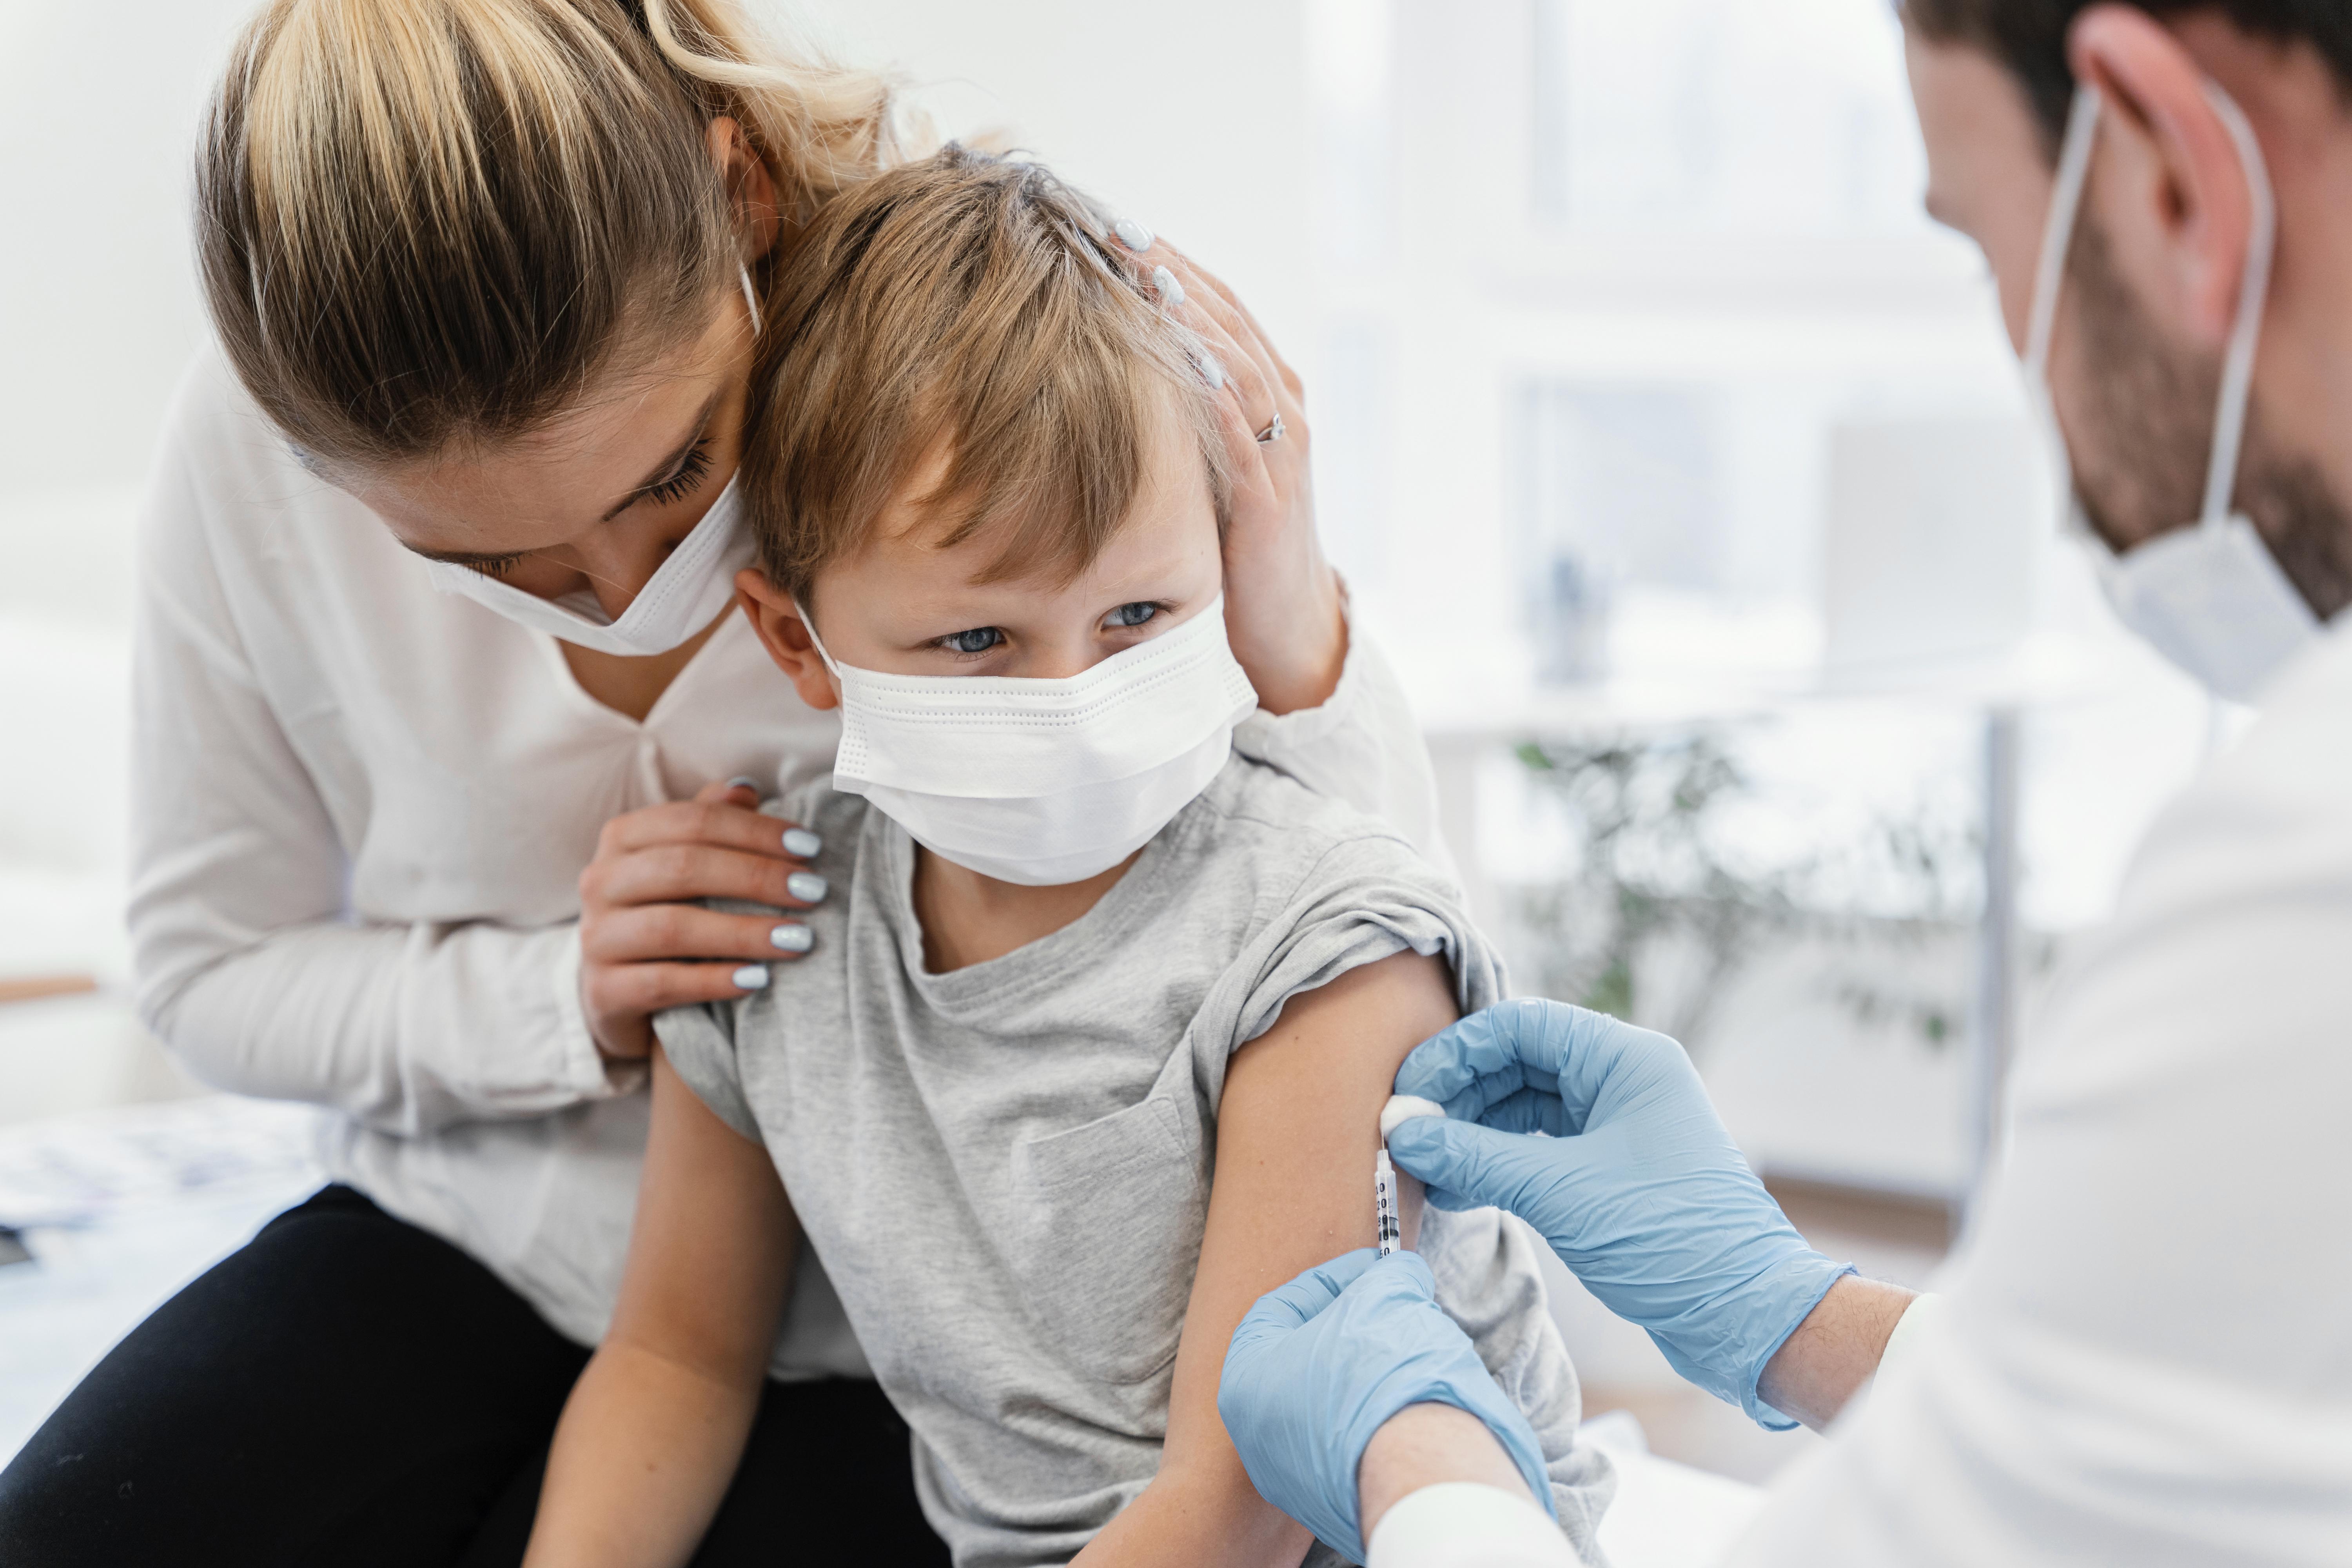 Ukraine to consider vaccination of children over 5 years old